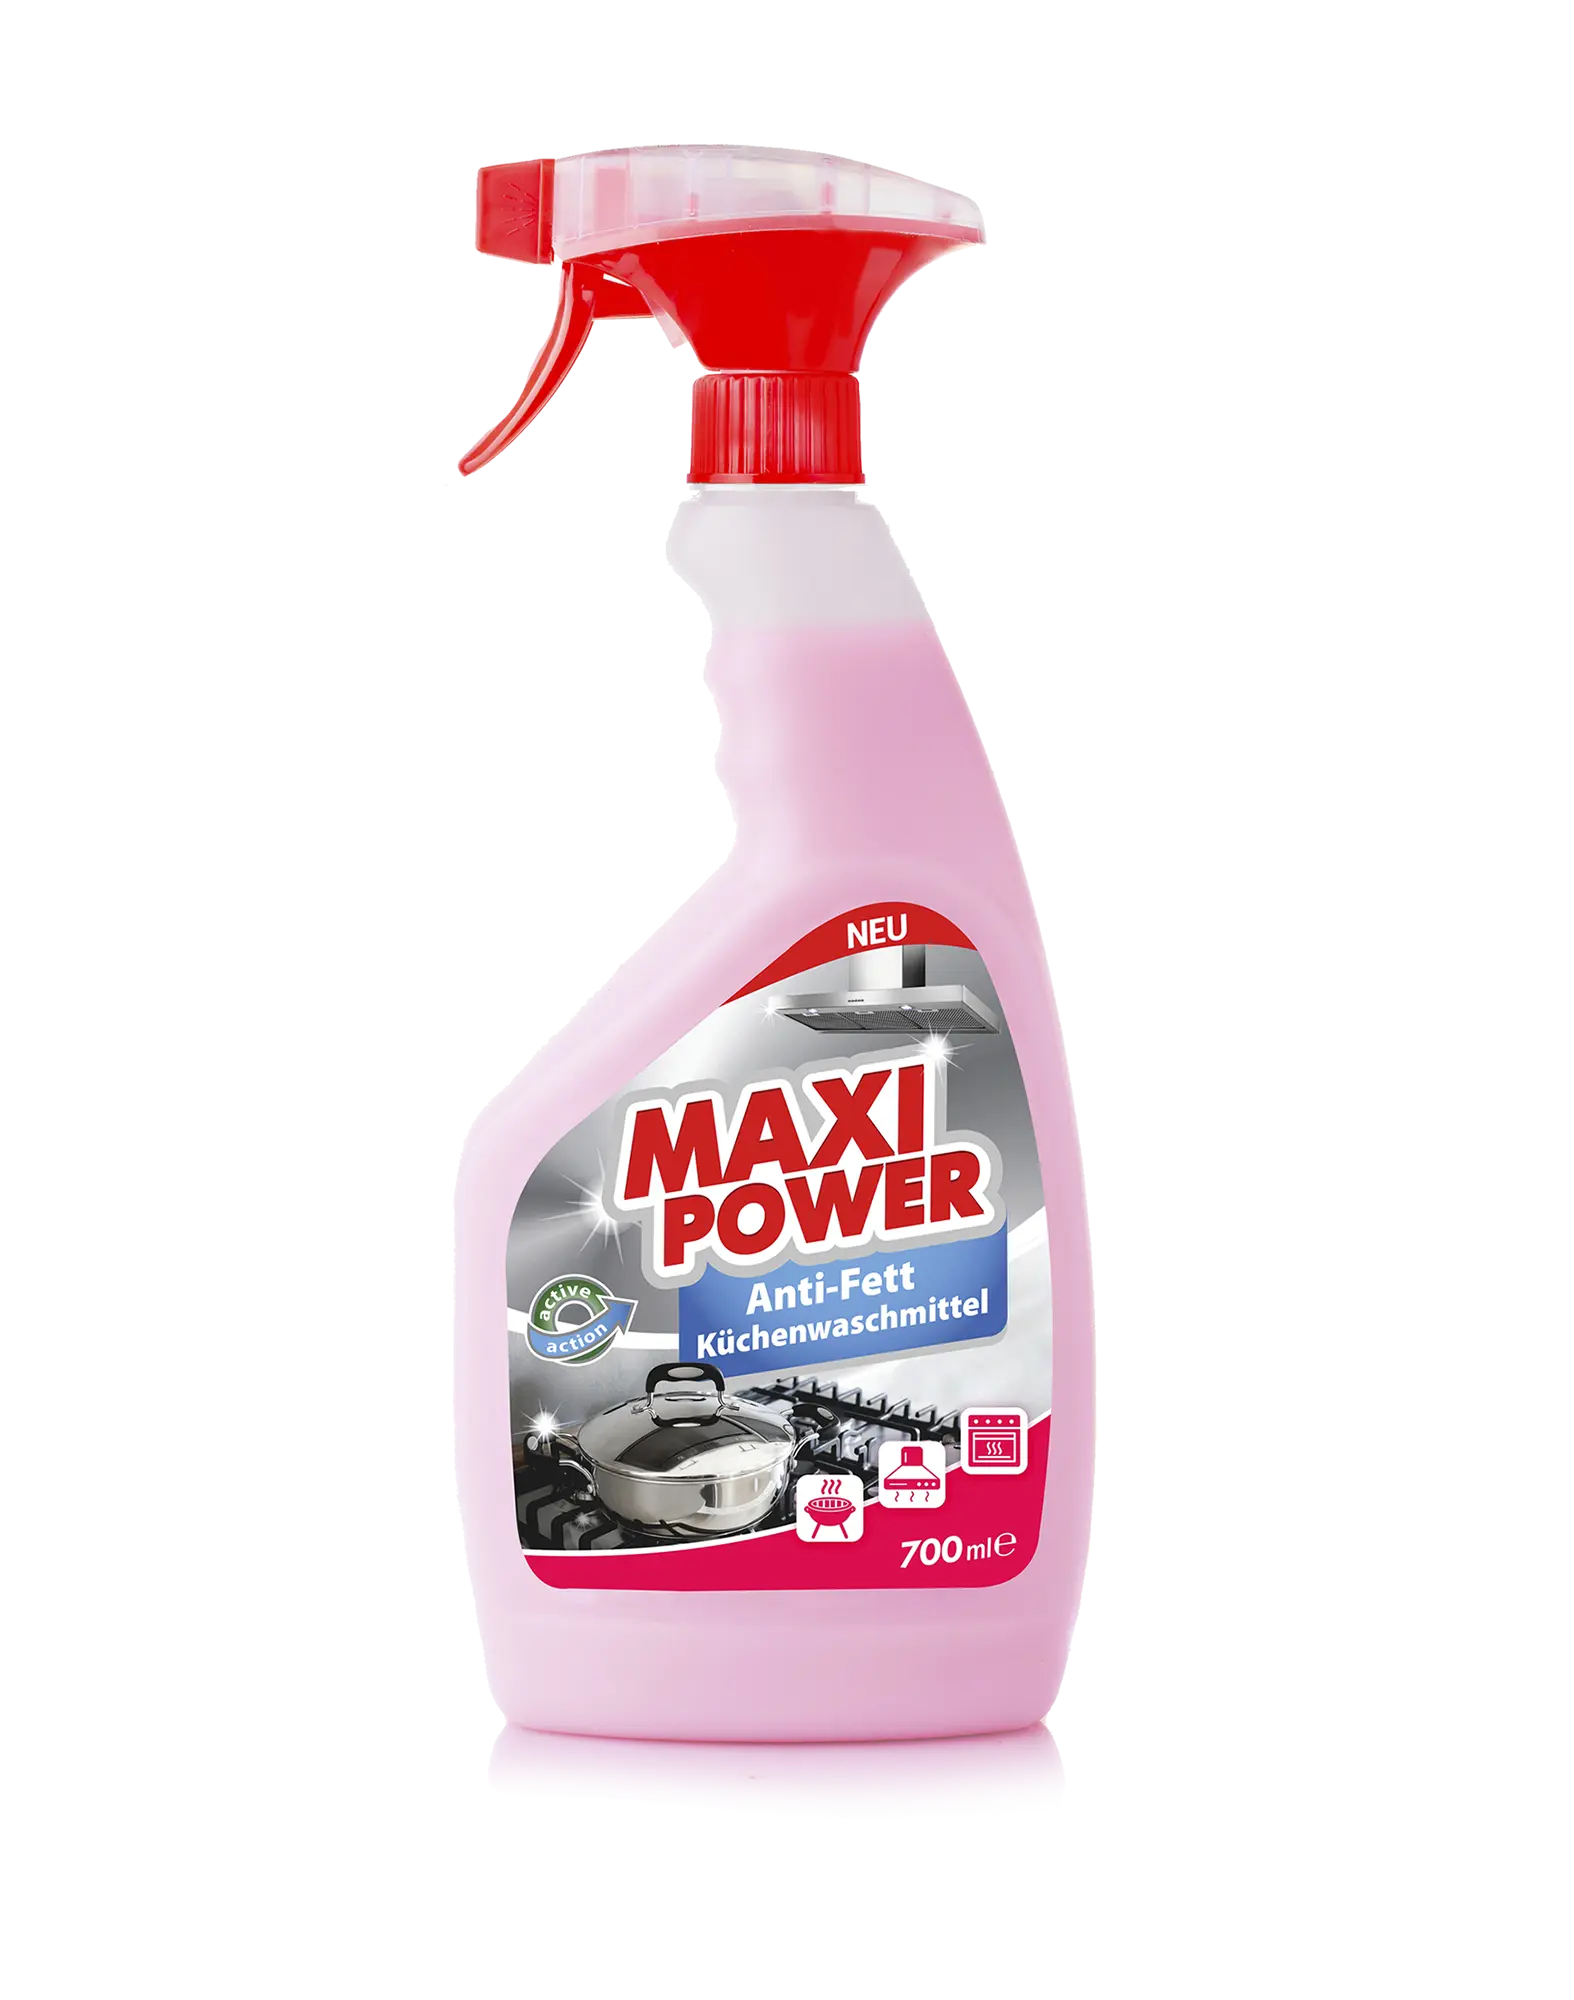 Maxi Power Cleaner for kitchen Anti grease